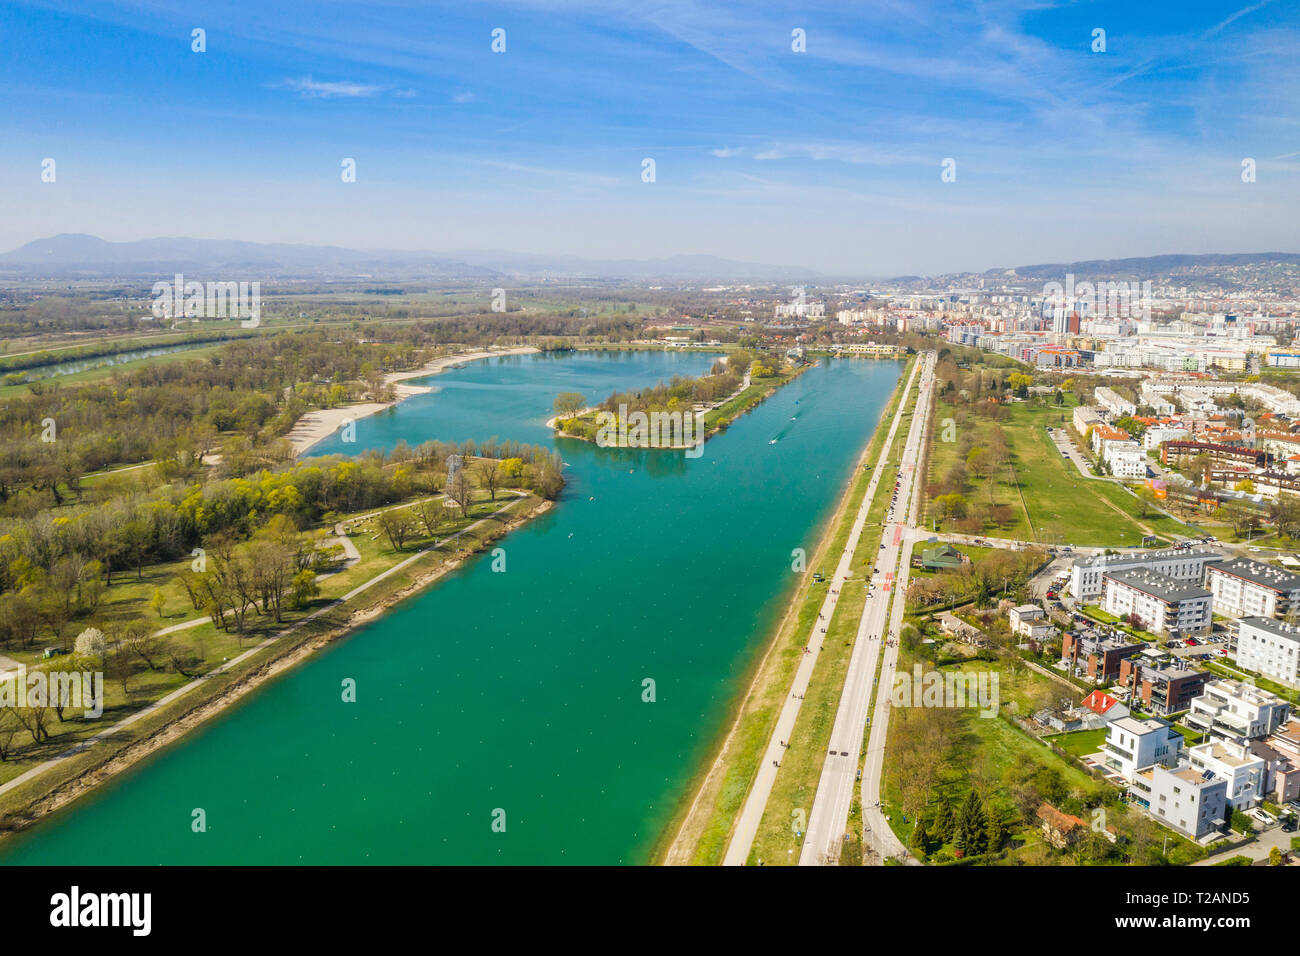 Zagreb, Croatia, Jarun lake, beautiful green recreation park area, sunny spring day, panoramic view from drone, city in background Stock Photo